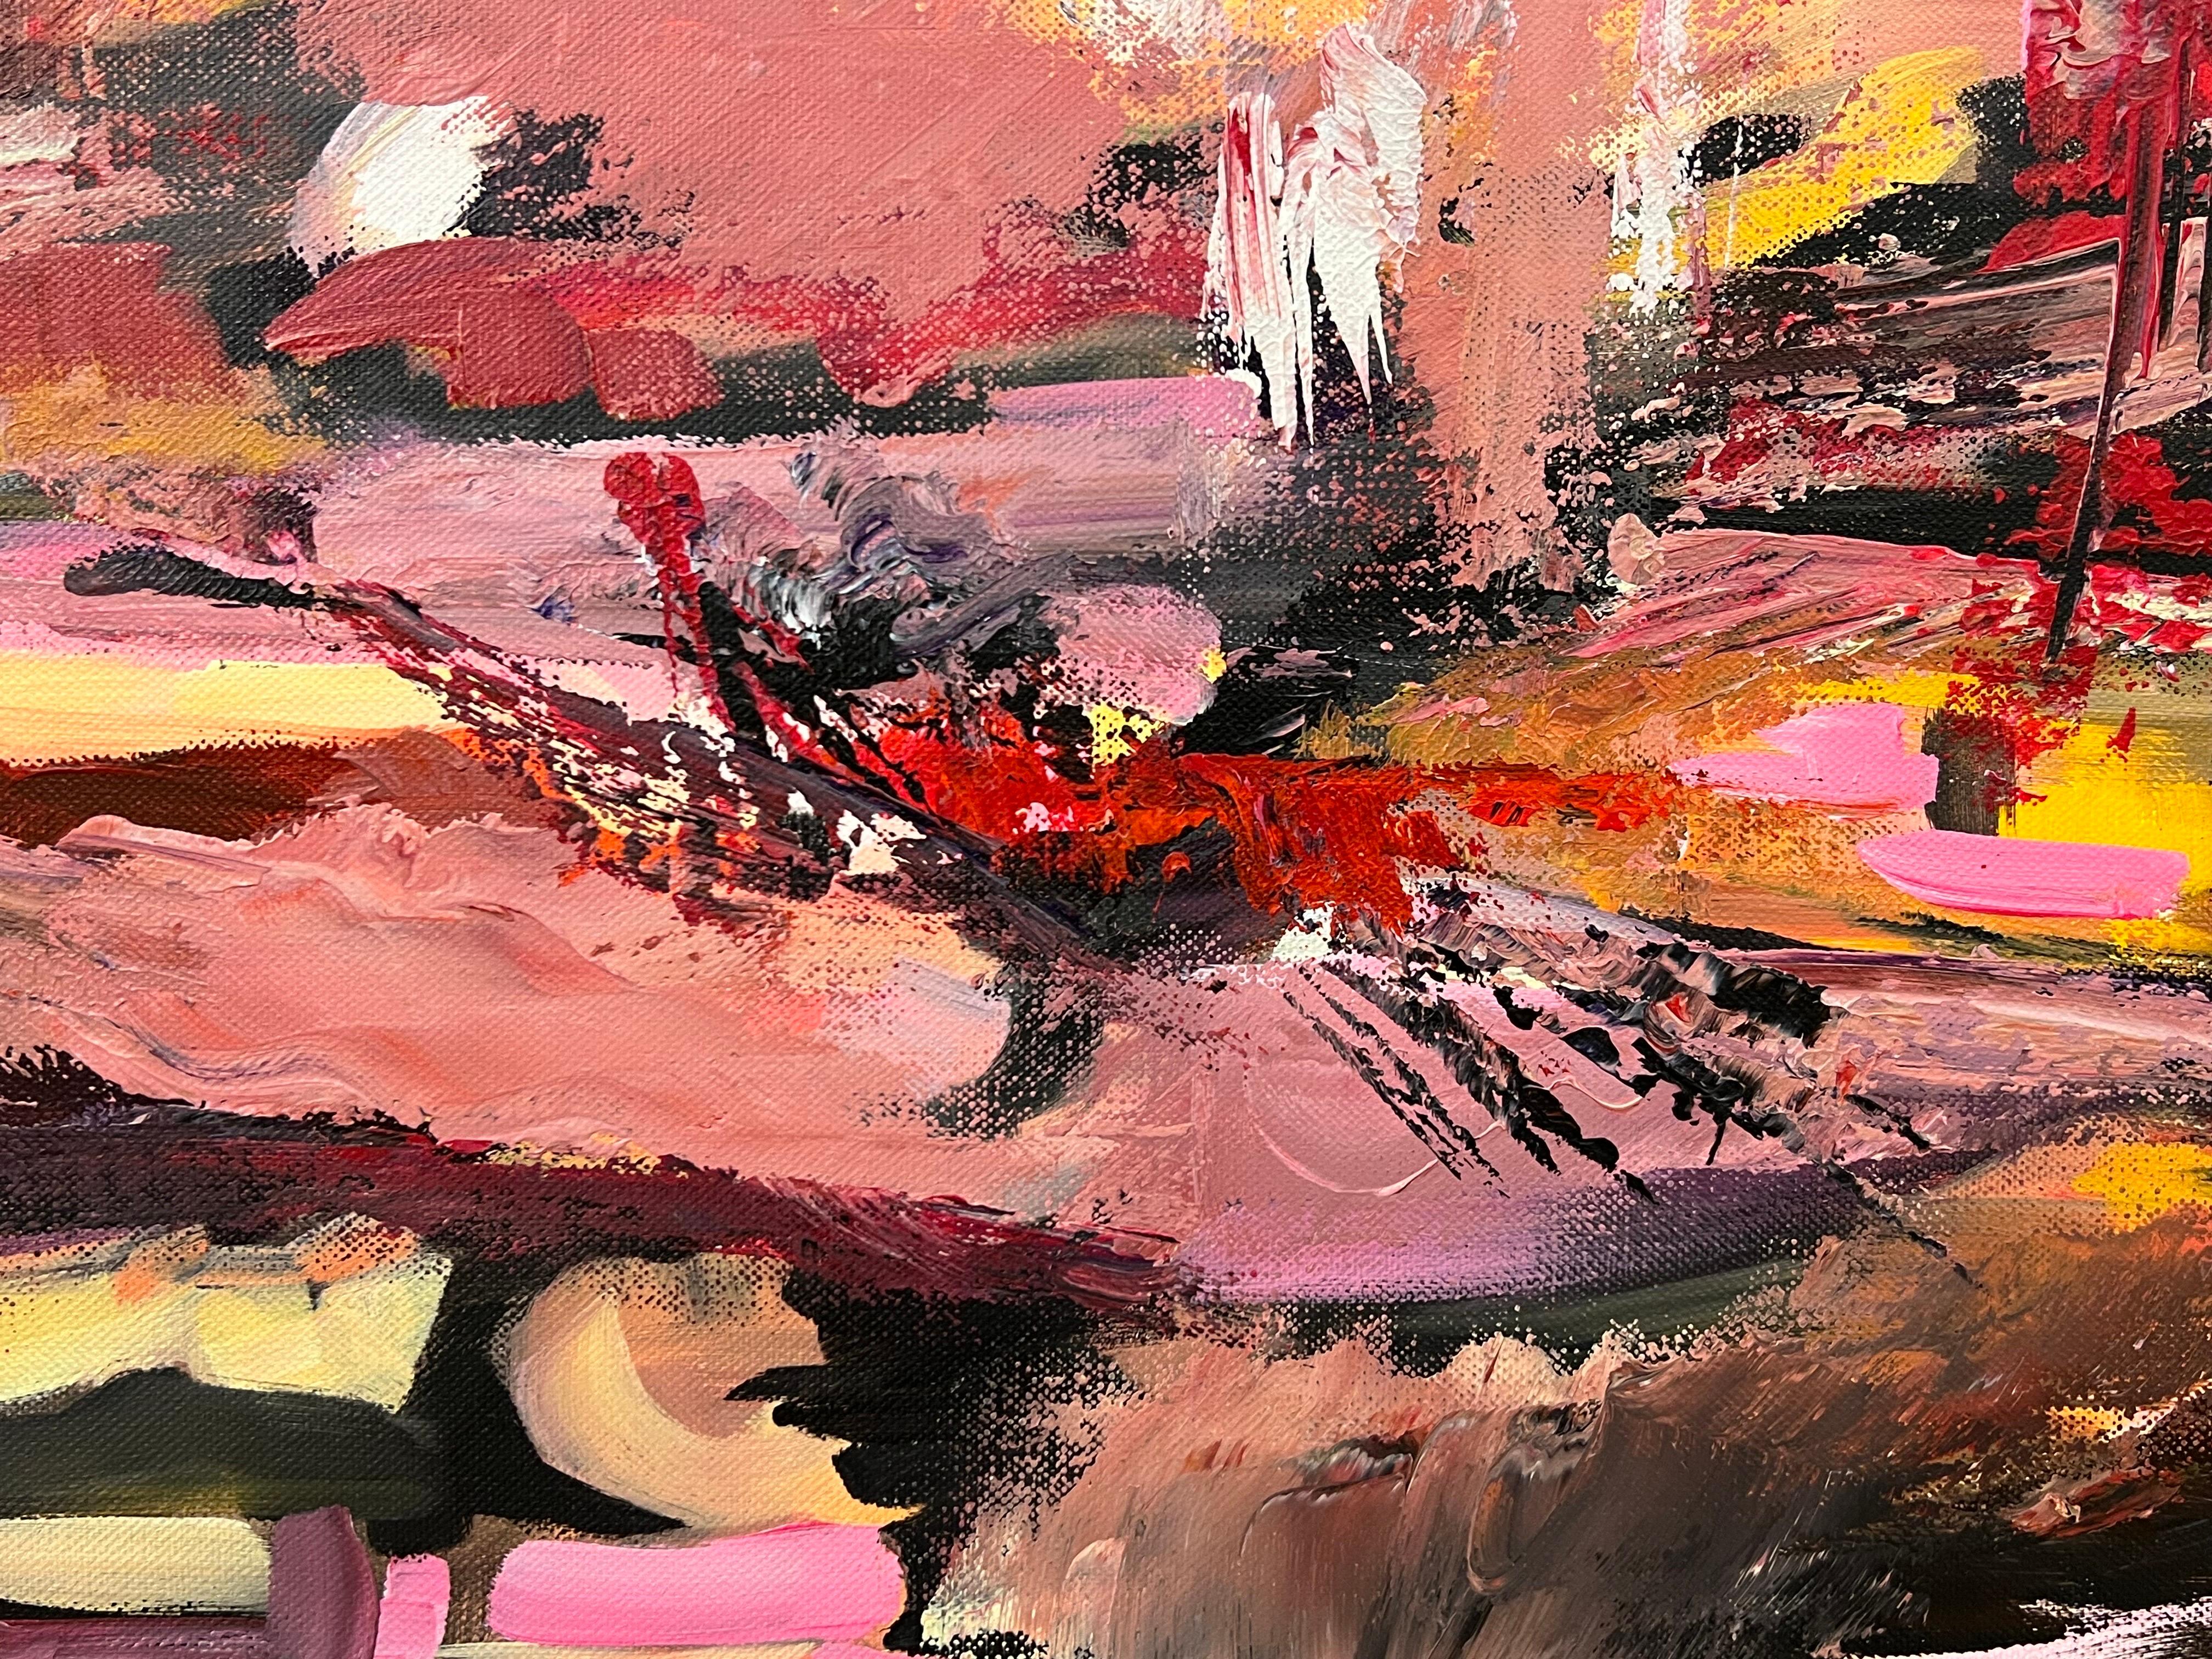 Pink Red & Orange Abstract Expressionist Painting by Contemporary British Artist For Sale 2